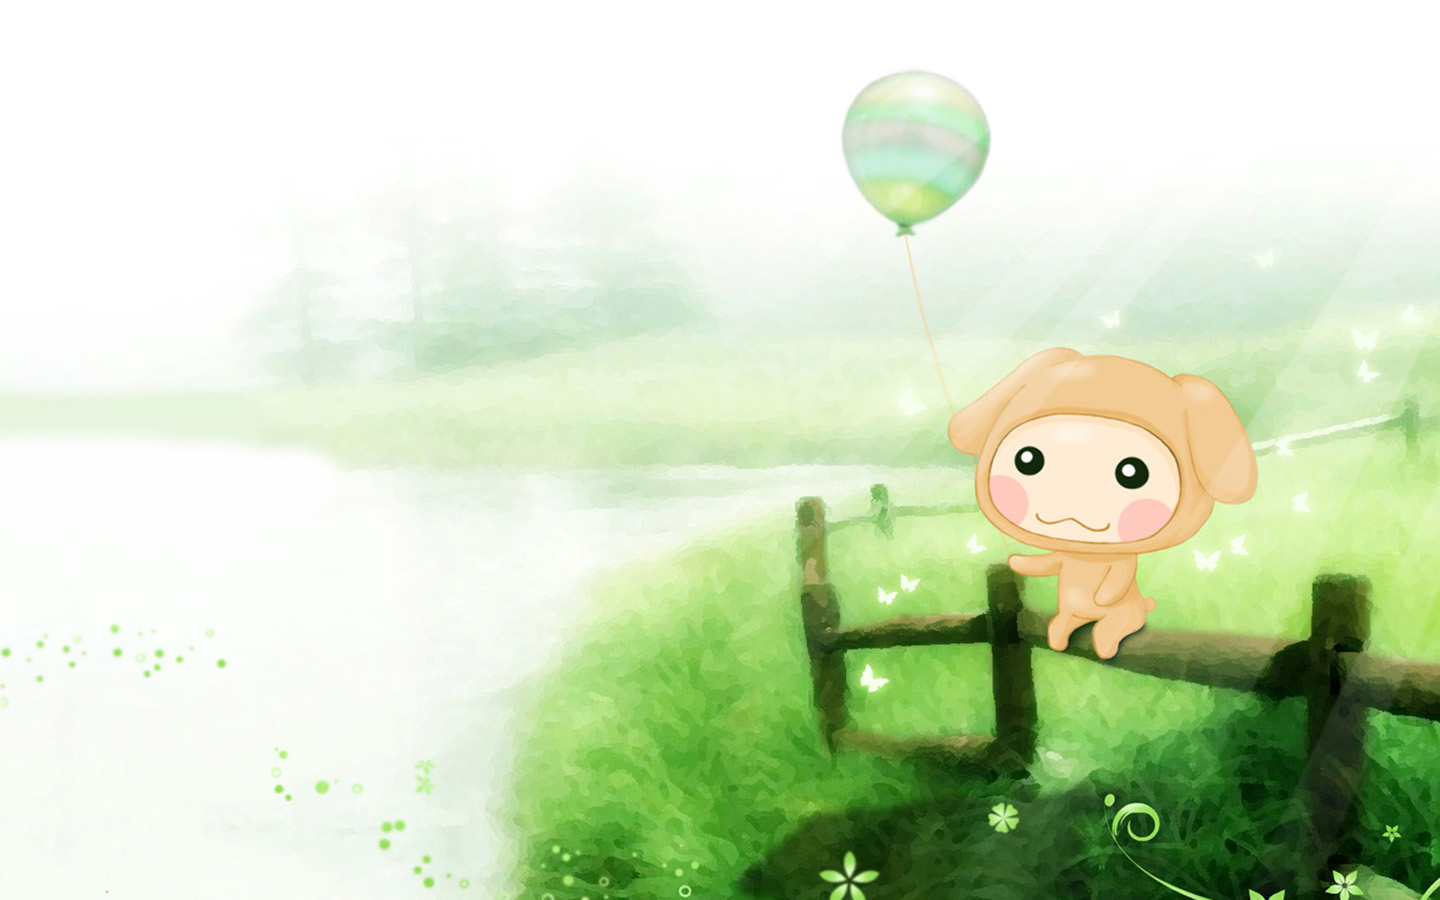 Wallpaper with Missing Balloons